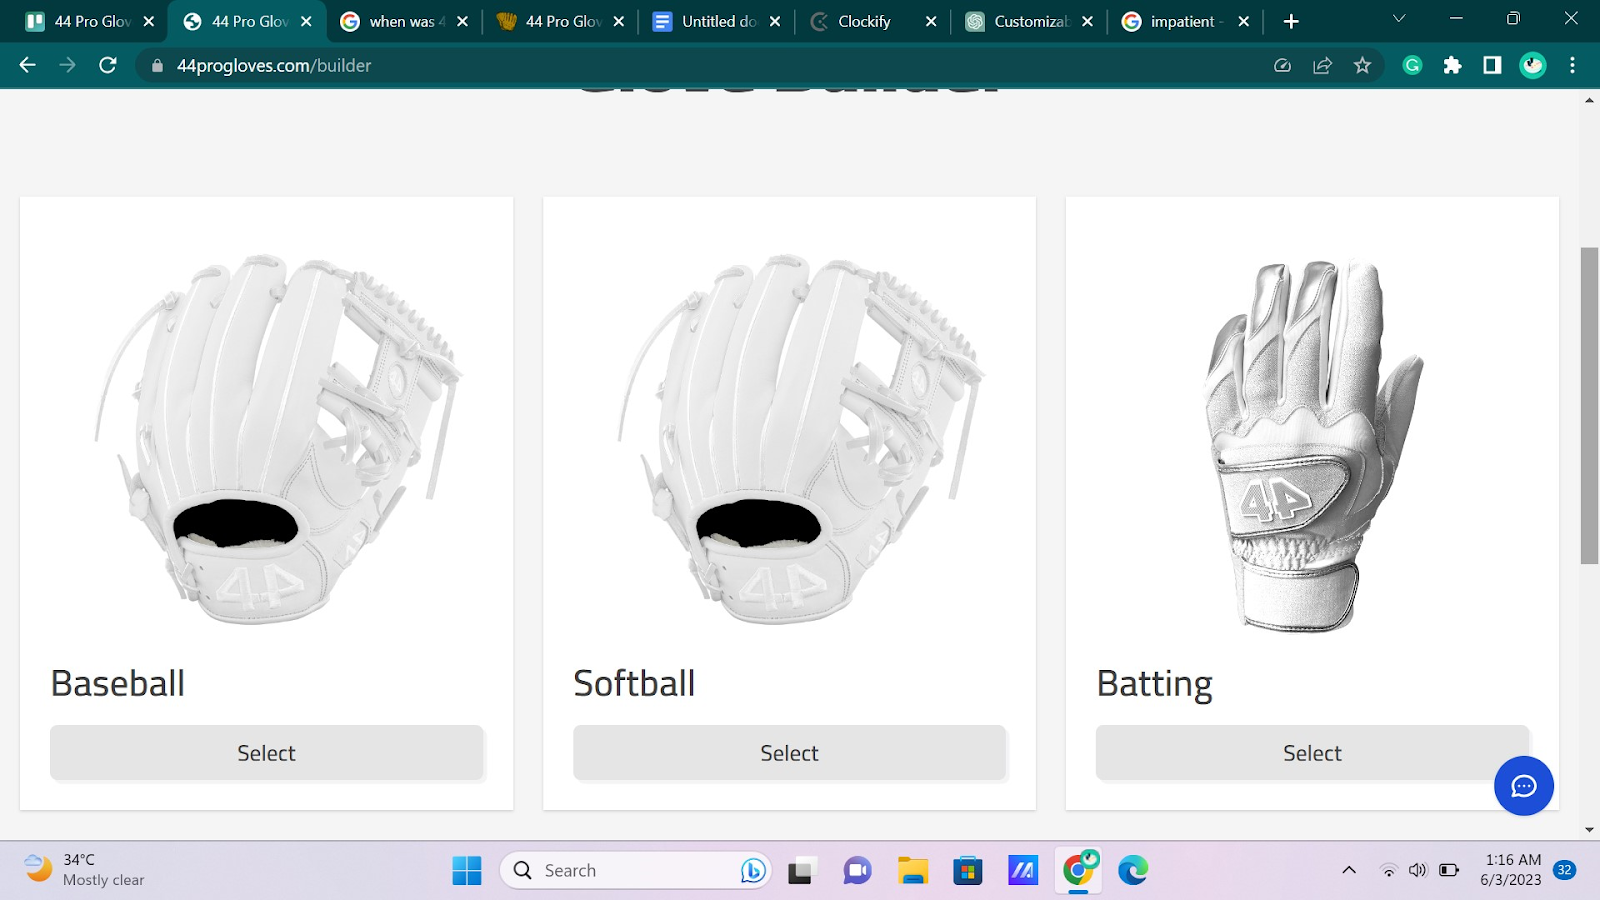 choosing your sport and glove